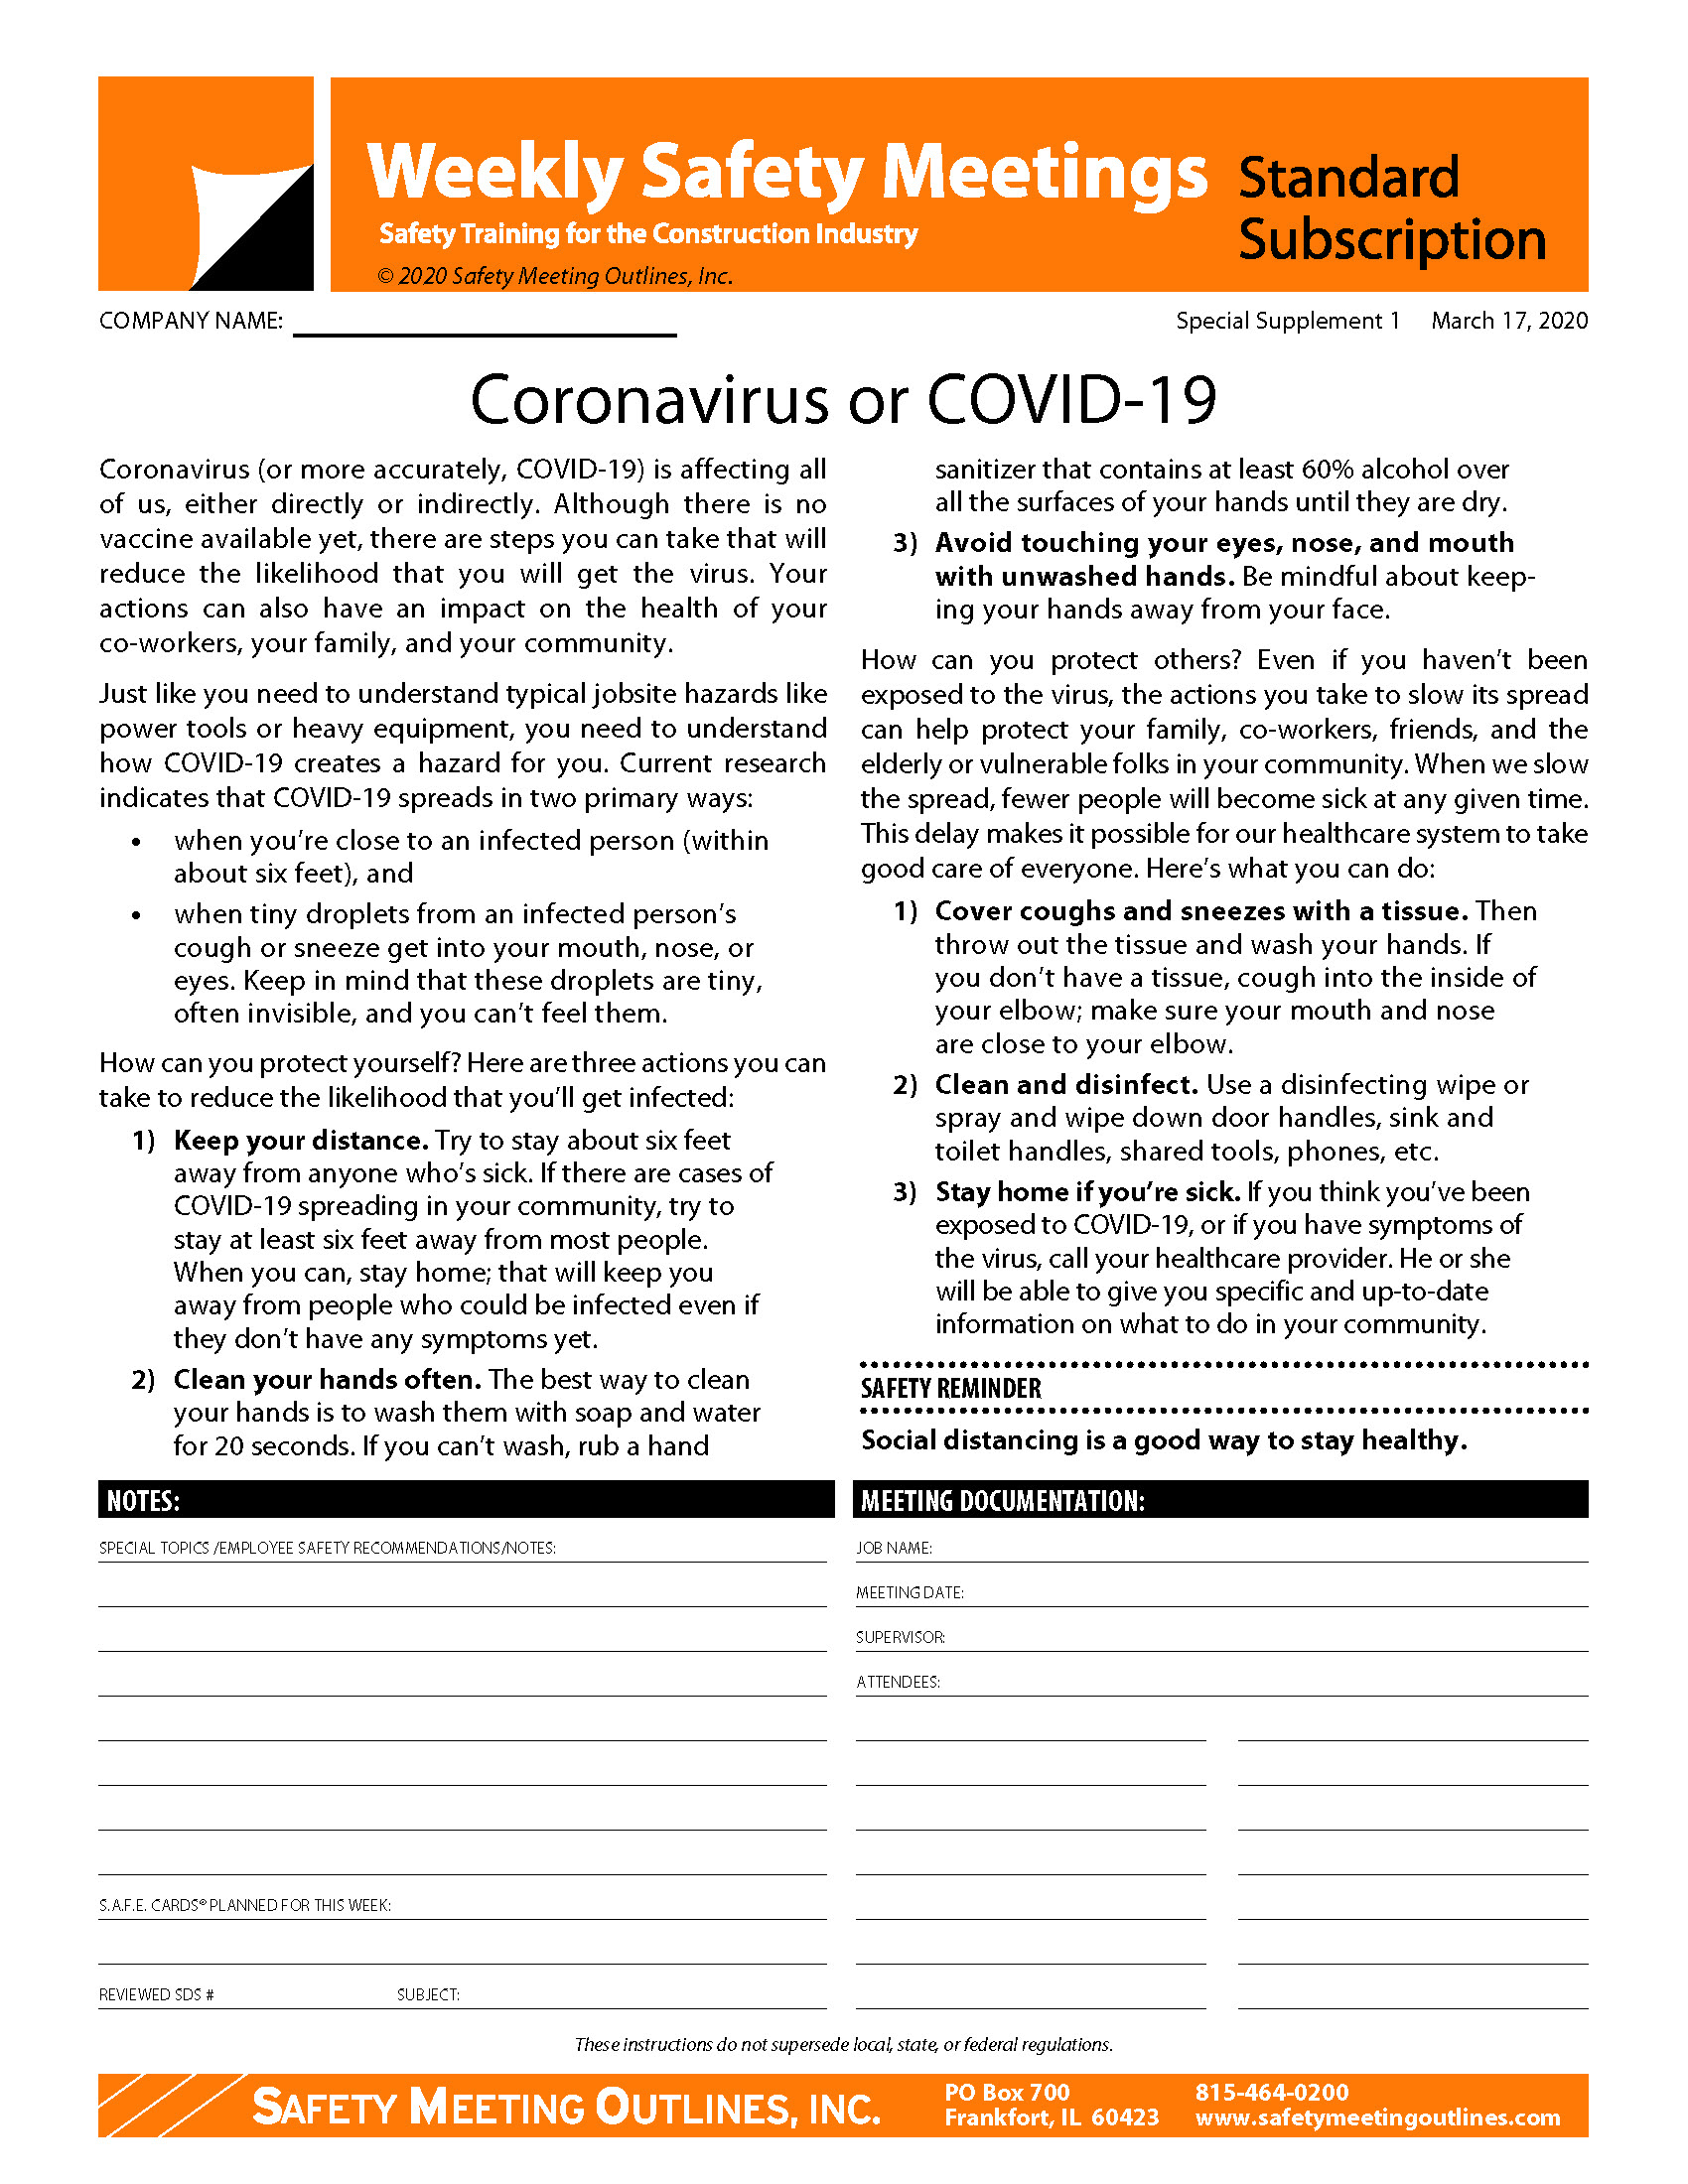 covid-19-special-supplement-1-english-standard